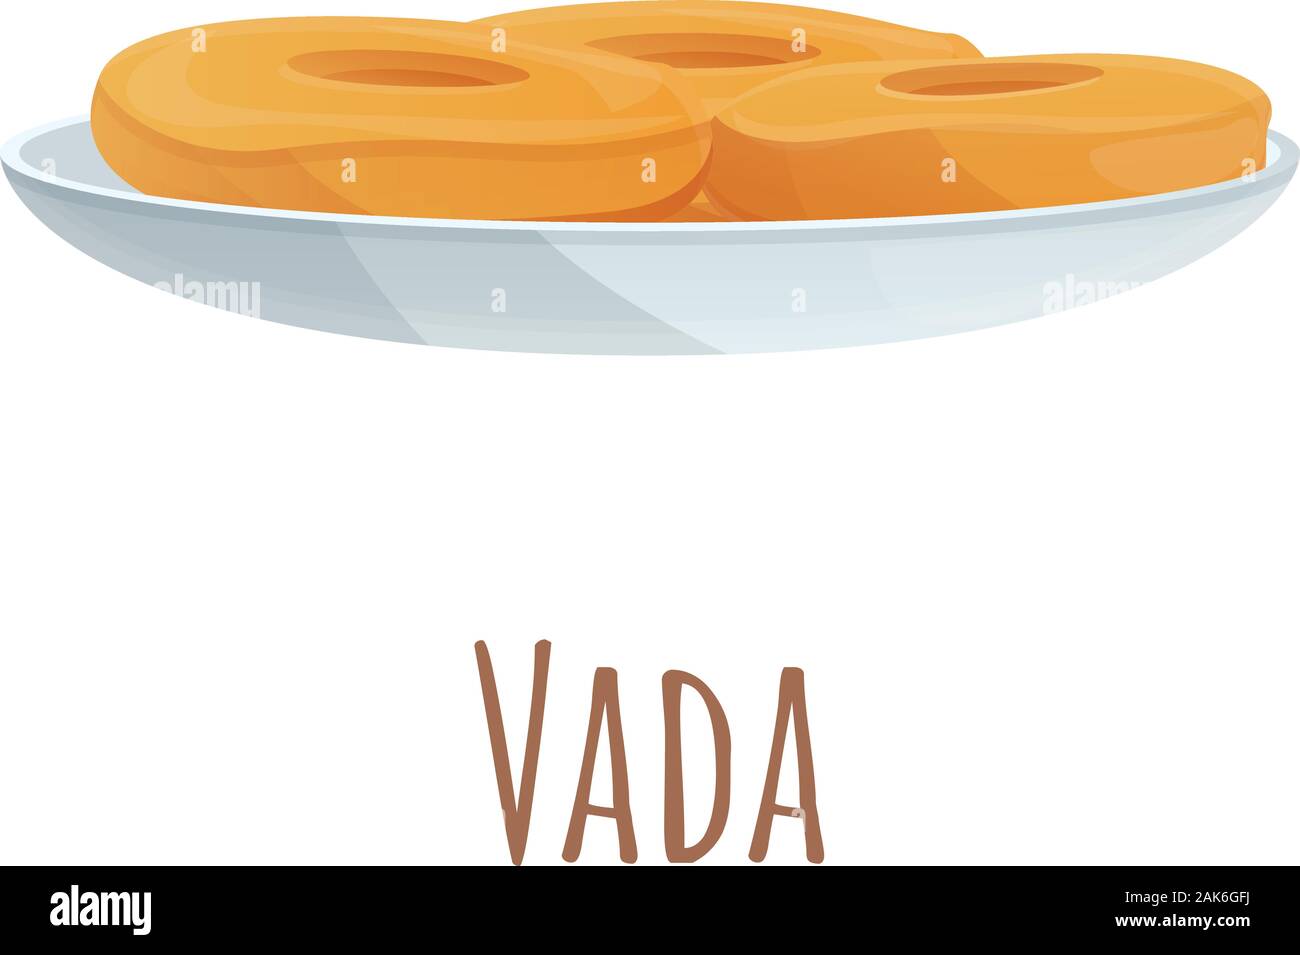 Vada pav and india Stock Vector Images - Alamy